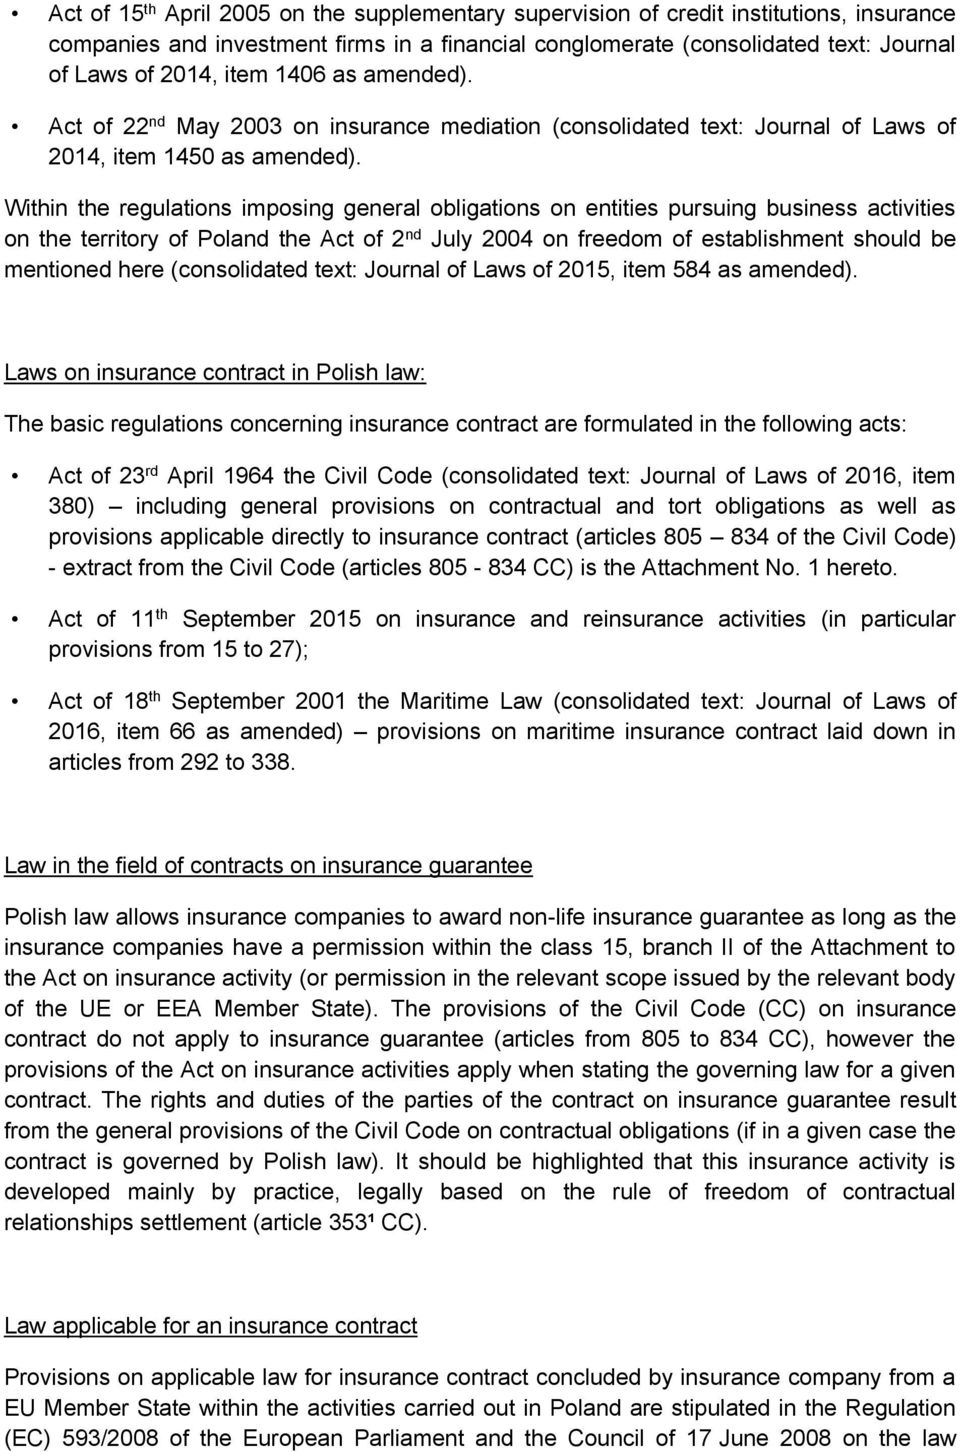 Within the regulations imposing general obligations on entities pursuing business activities on the territory of Poland the Act of 2 nd July 2004 on freedom of establishment should be mentioned here